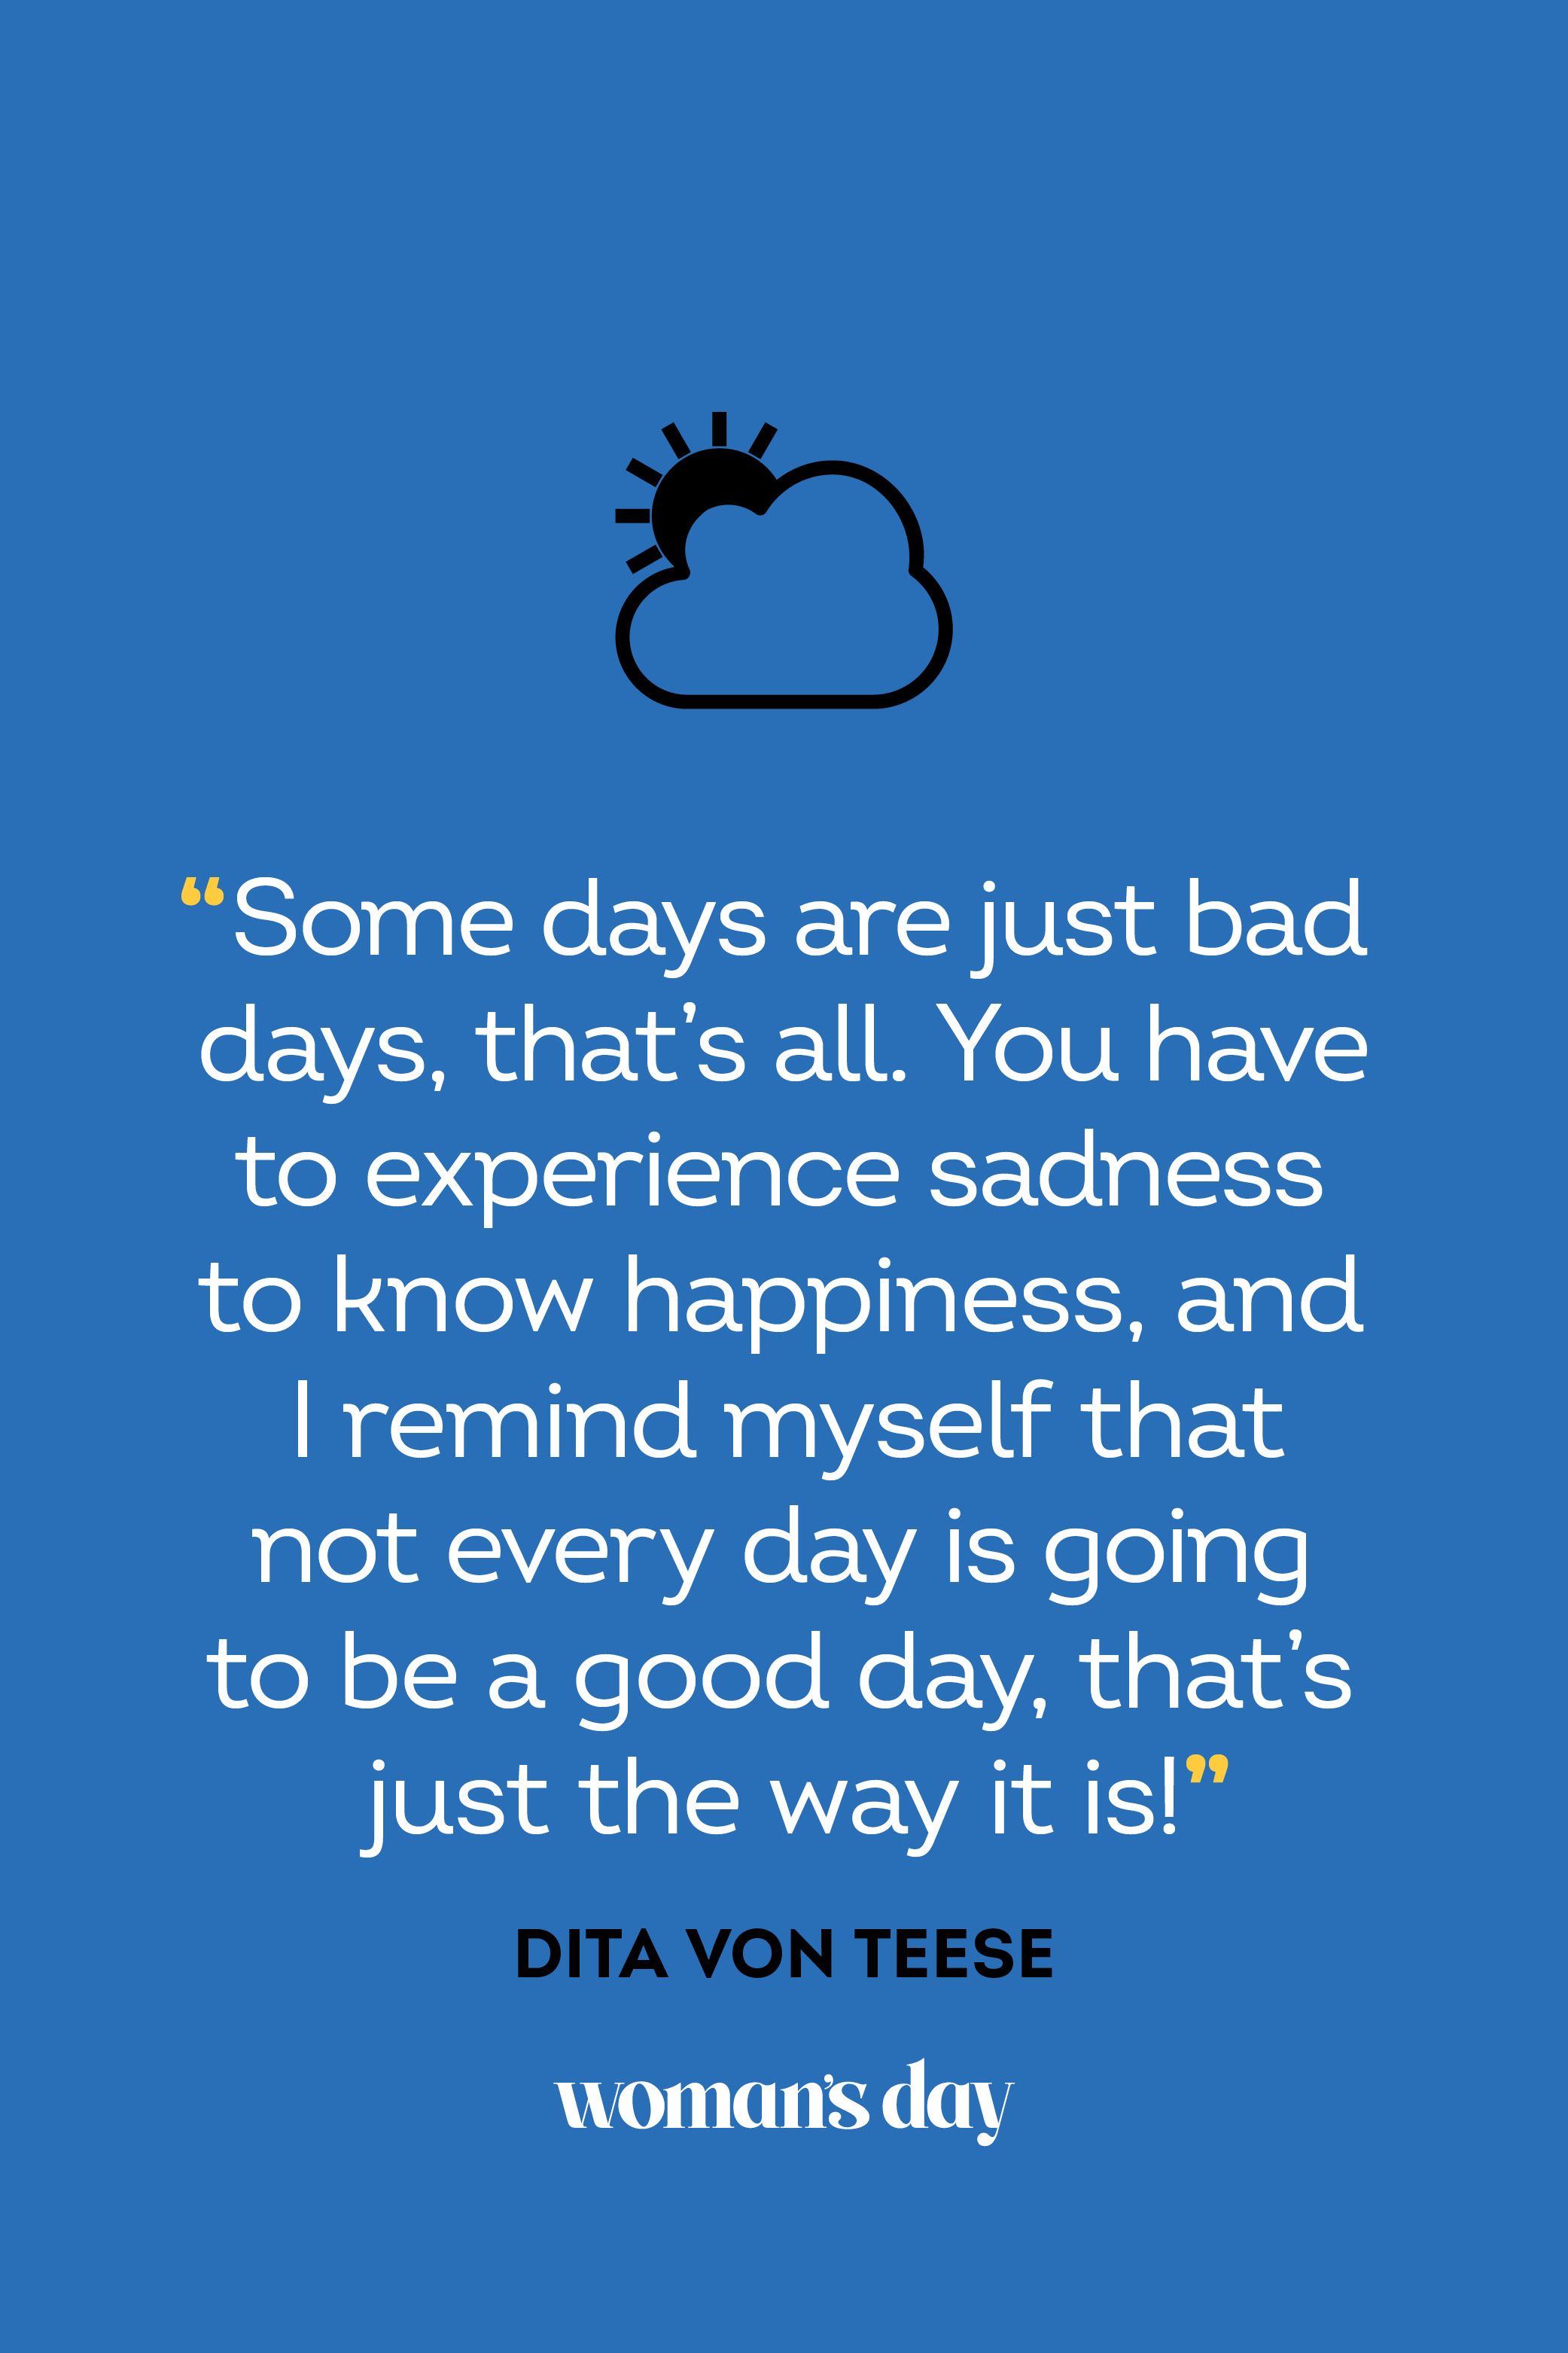 im having a bad day quotes